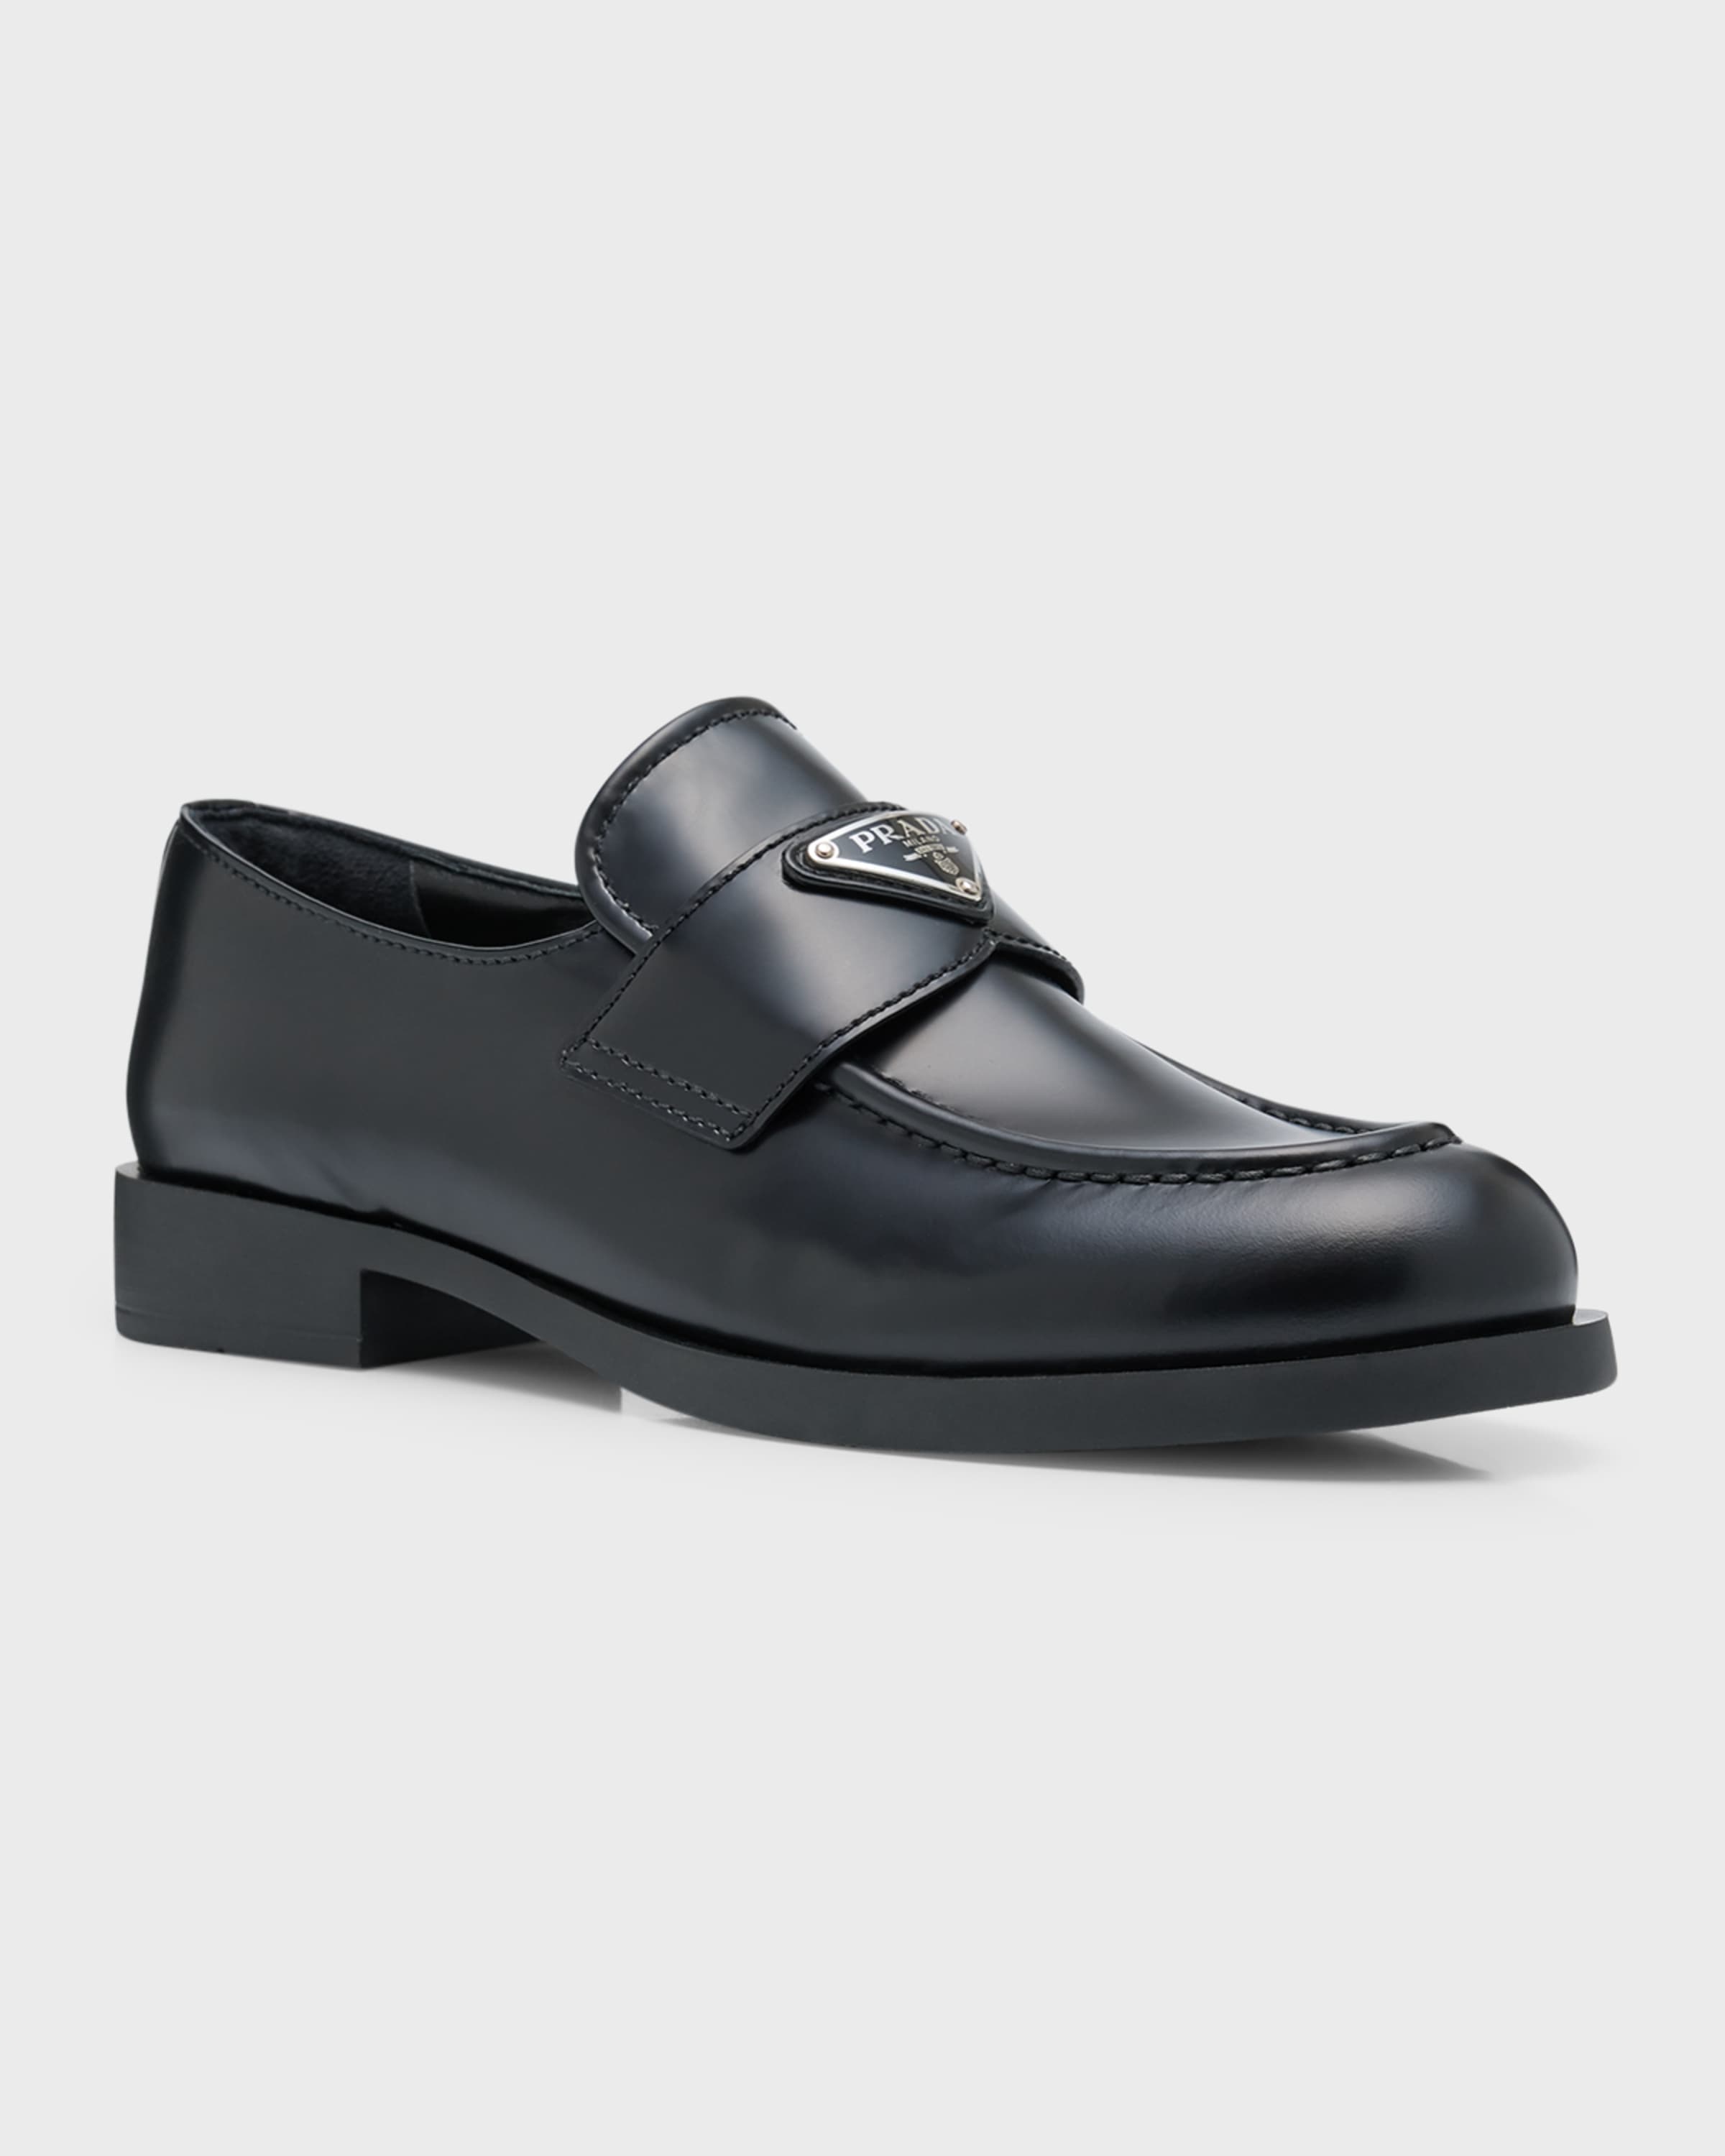 Leather Slip-On Flat Loafers - 3